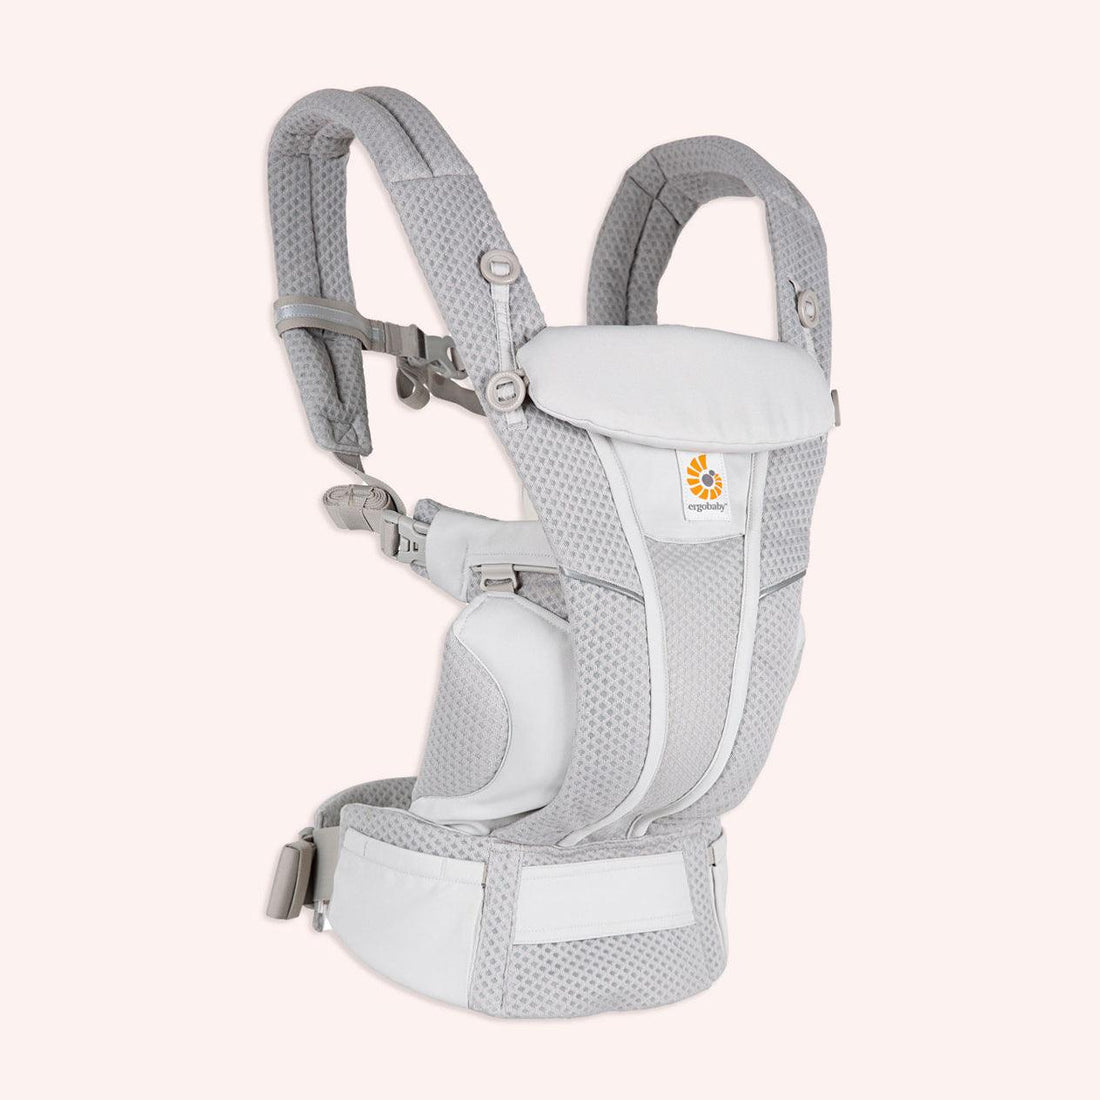 Omni Breeze Baby Carrier - Pearl Grey